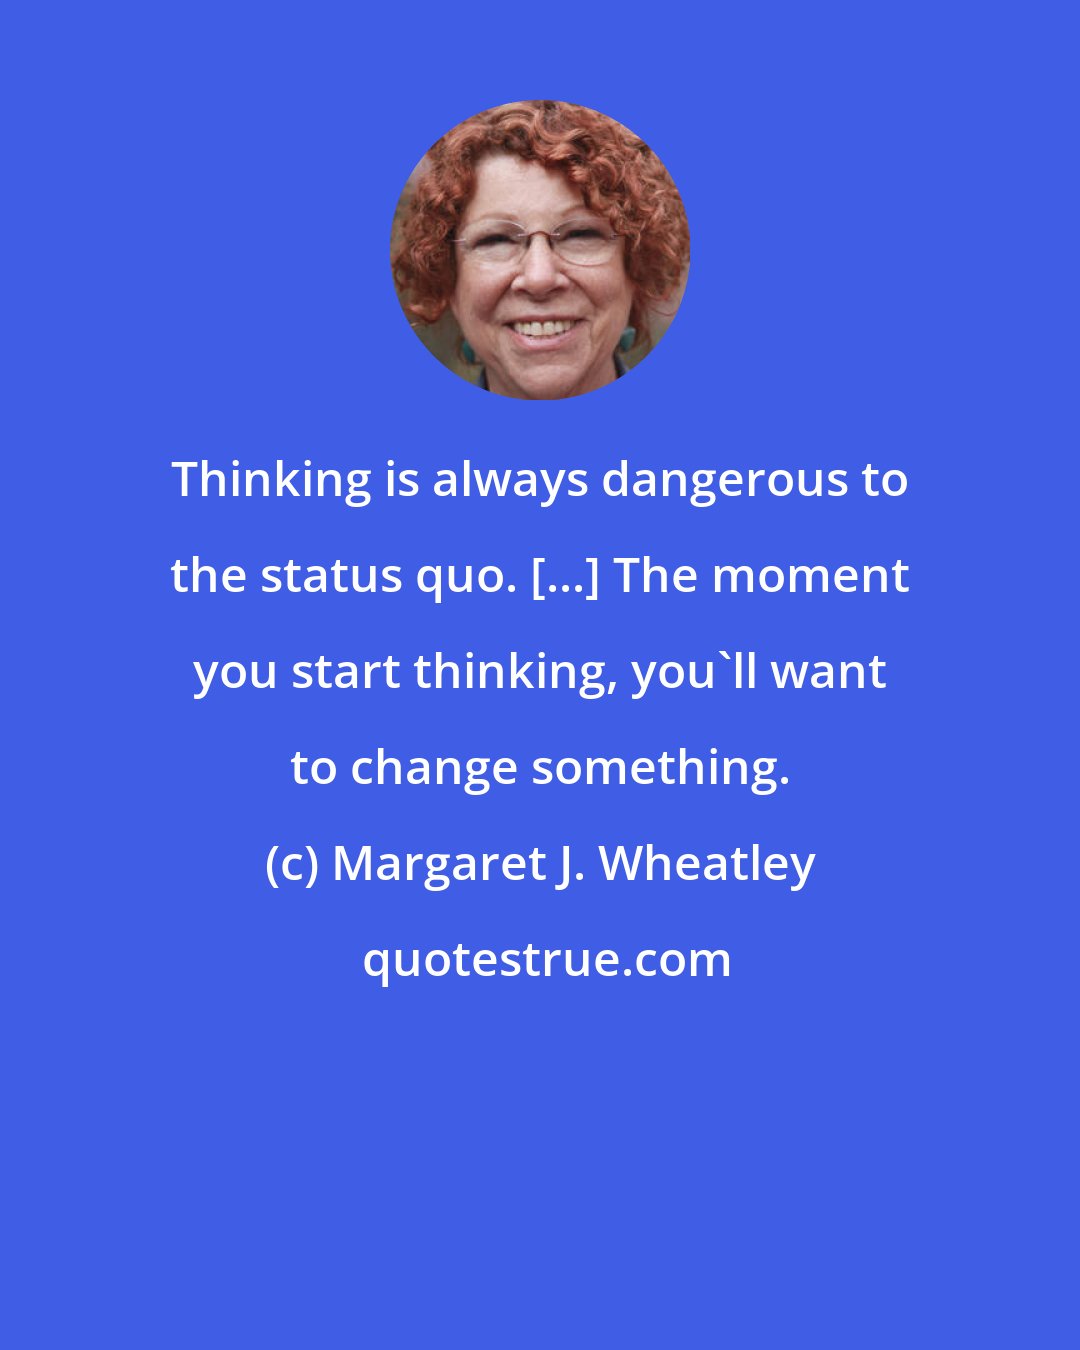 Margaret J. Wheatley: Thinking is always dangerous to the status quo. [...] The moment you start thinking, you'll want to change something.